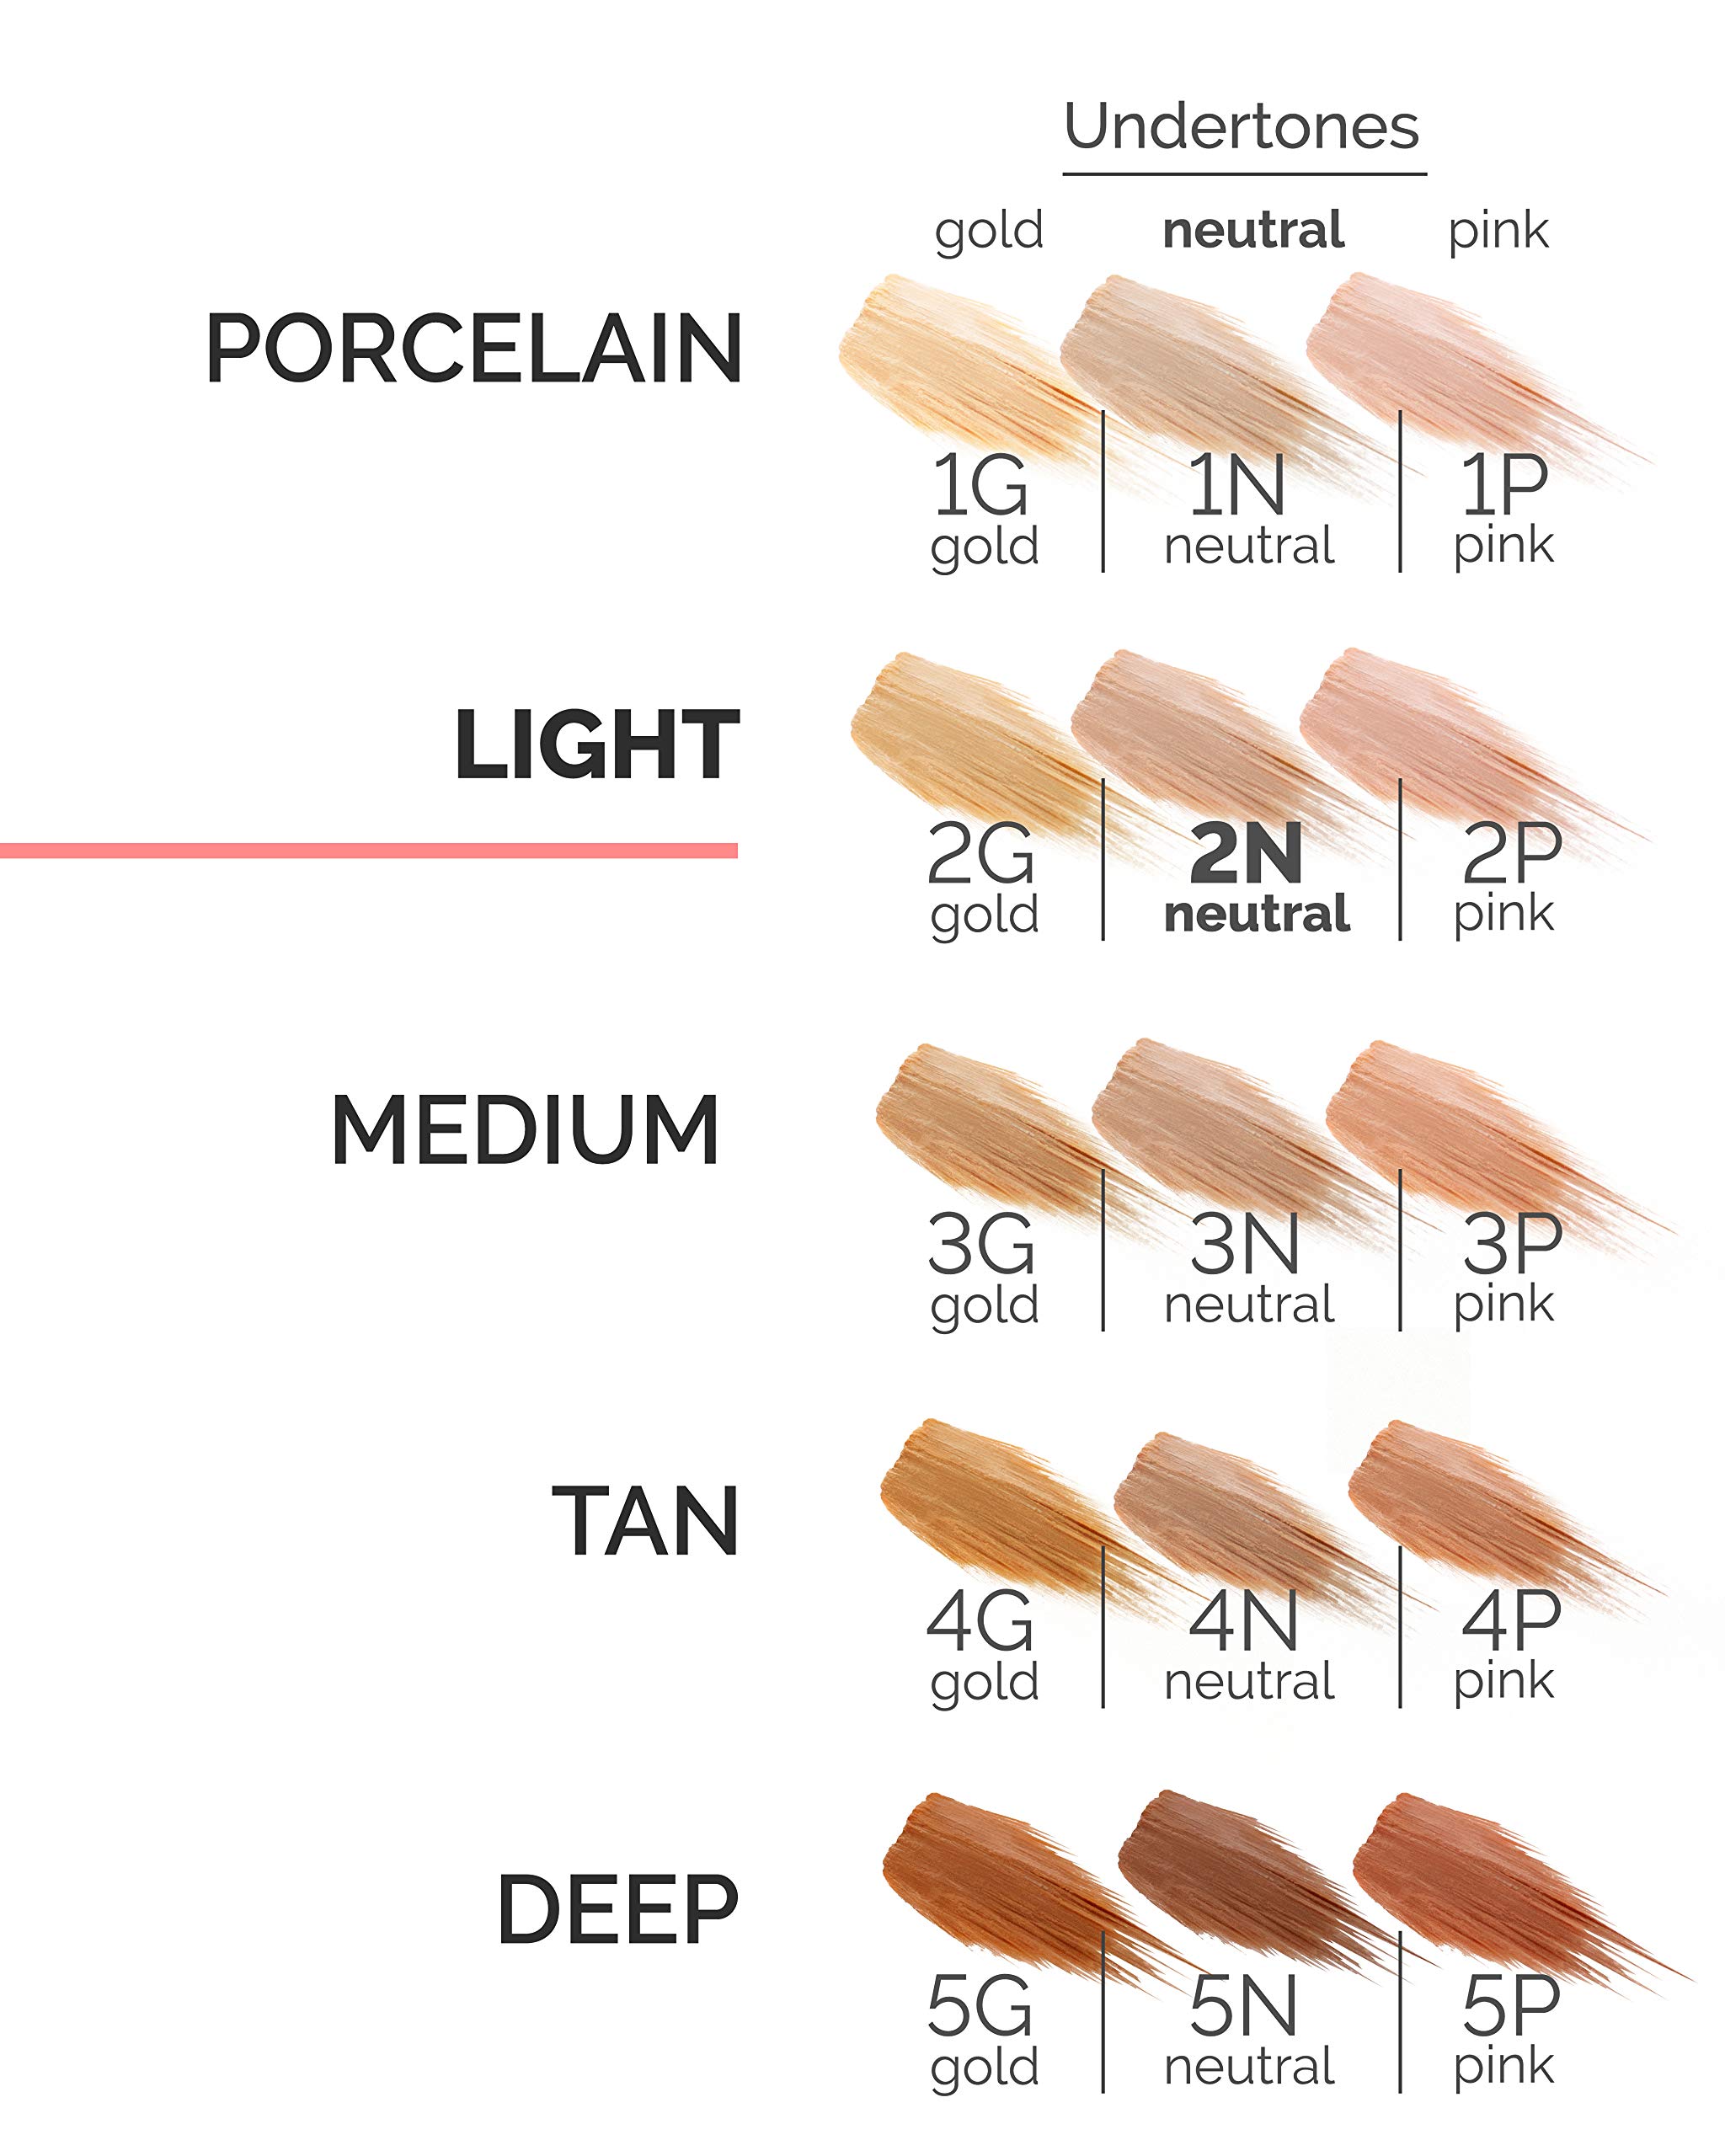 Veil Cosmetics | Complexion Fix Concealer | Shade 2N Light Neutral | Multi-Use Leakproof Pen | Oil-Free, Liquid, Concealer, Highlighter & Corrector | Vegan | Cruelty, Paraben, & Fragrance Free